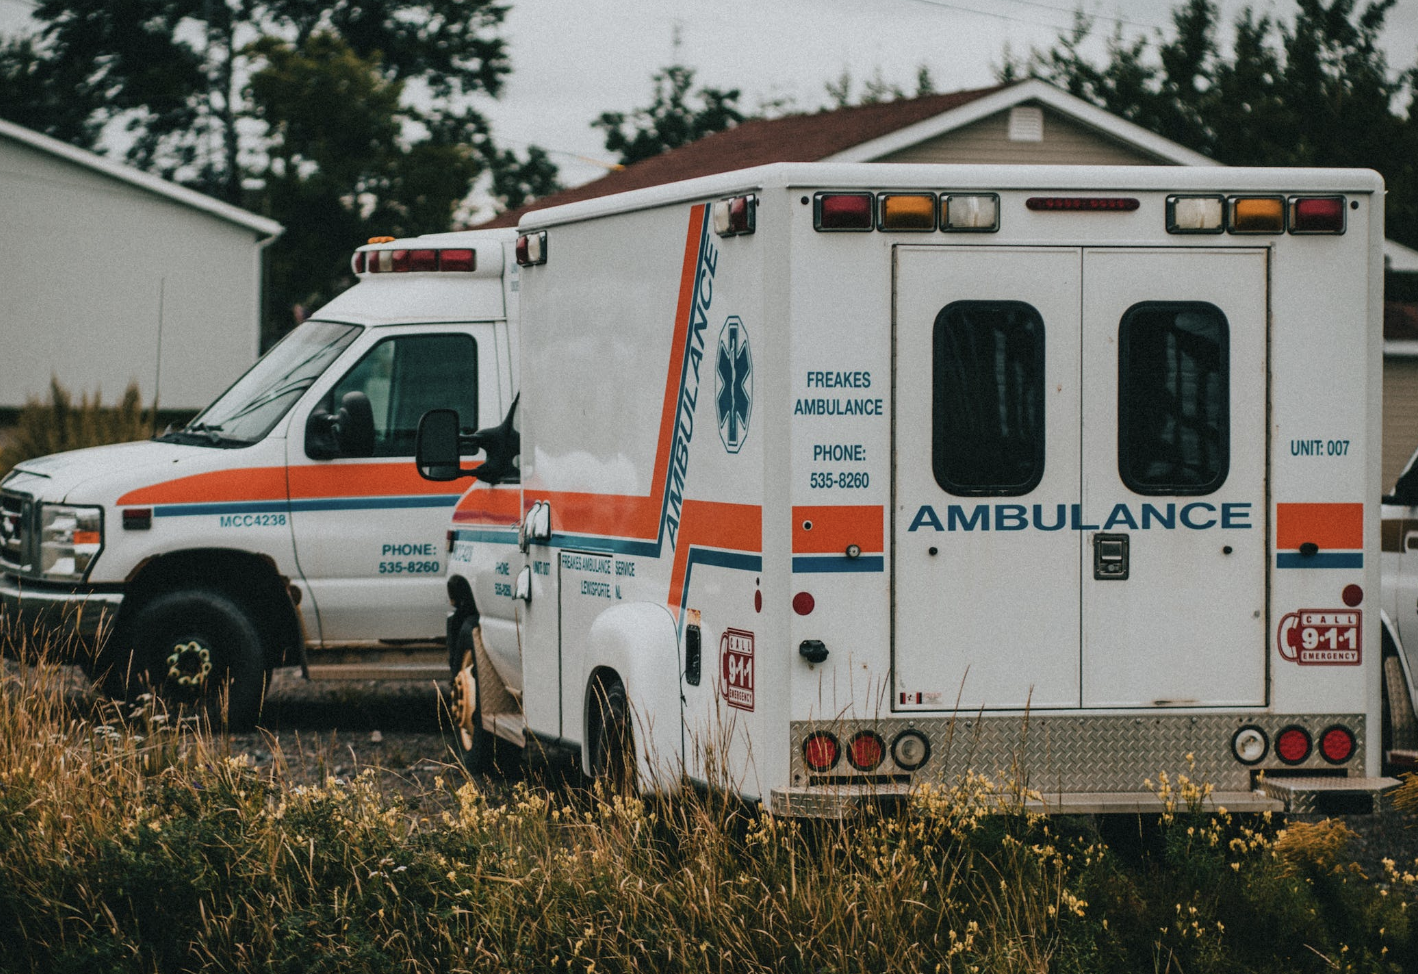 Two ambulances parked in a grassy area